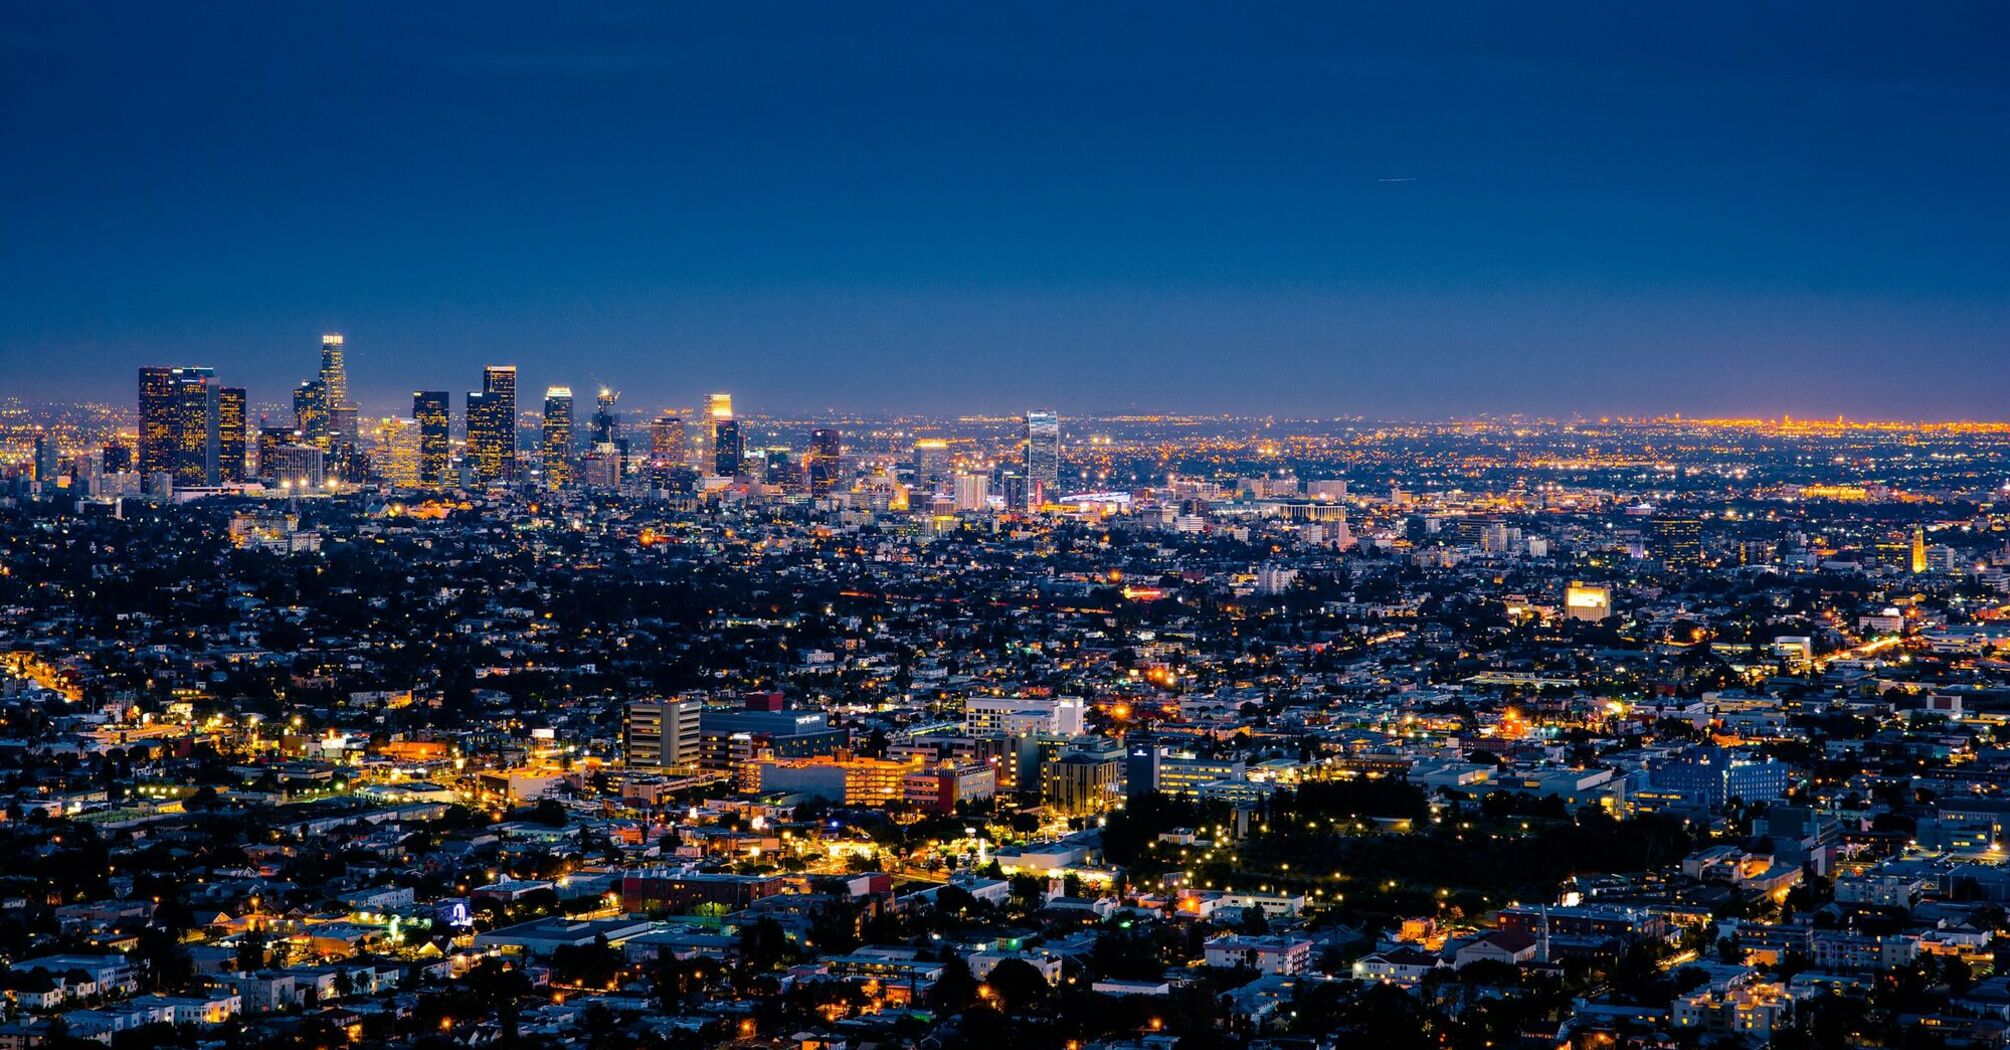 Panoramic view of nighttime Los Angeles